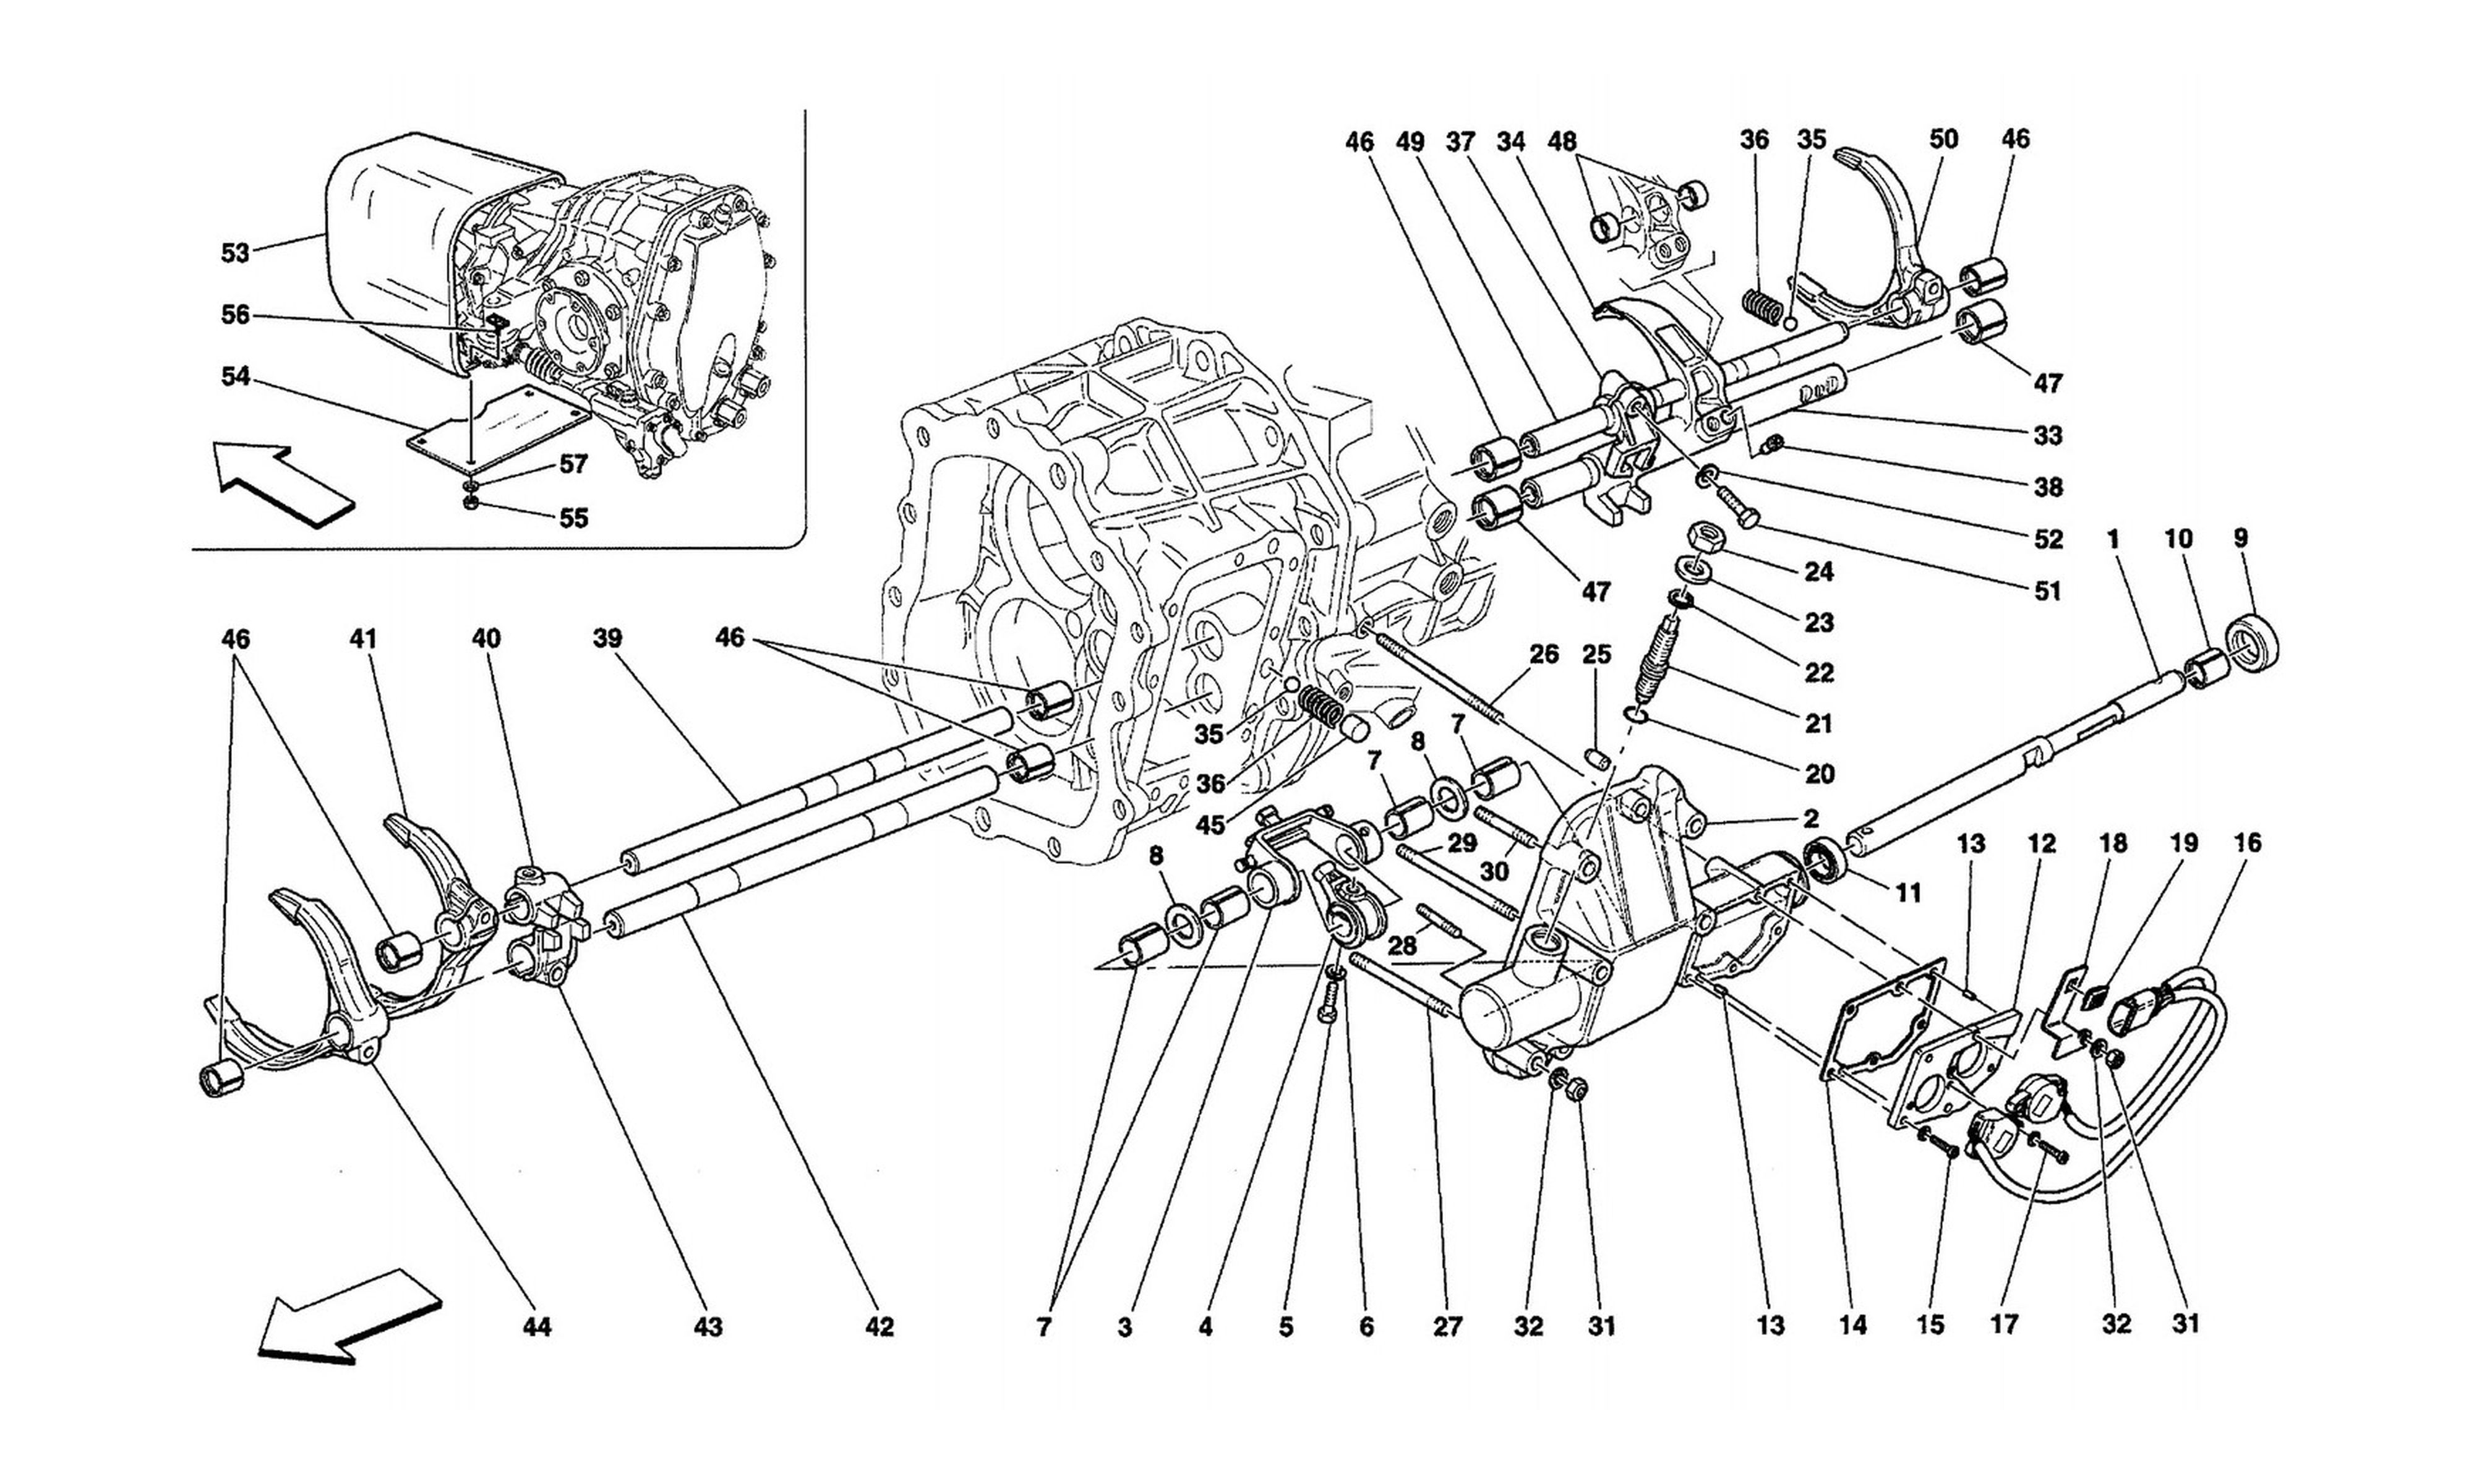 Schematic: Inside Gearbox Controls -Valid For F1-